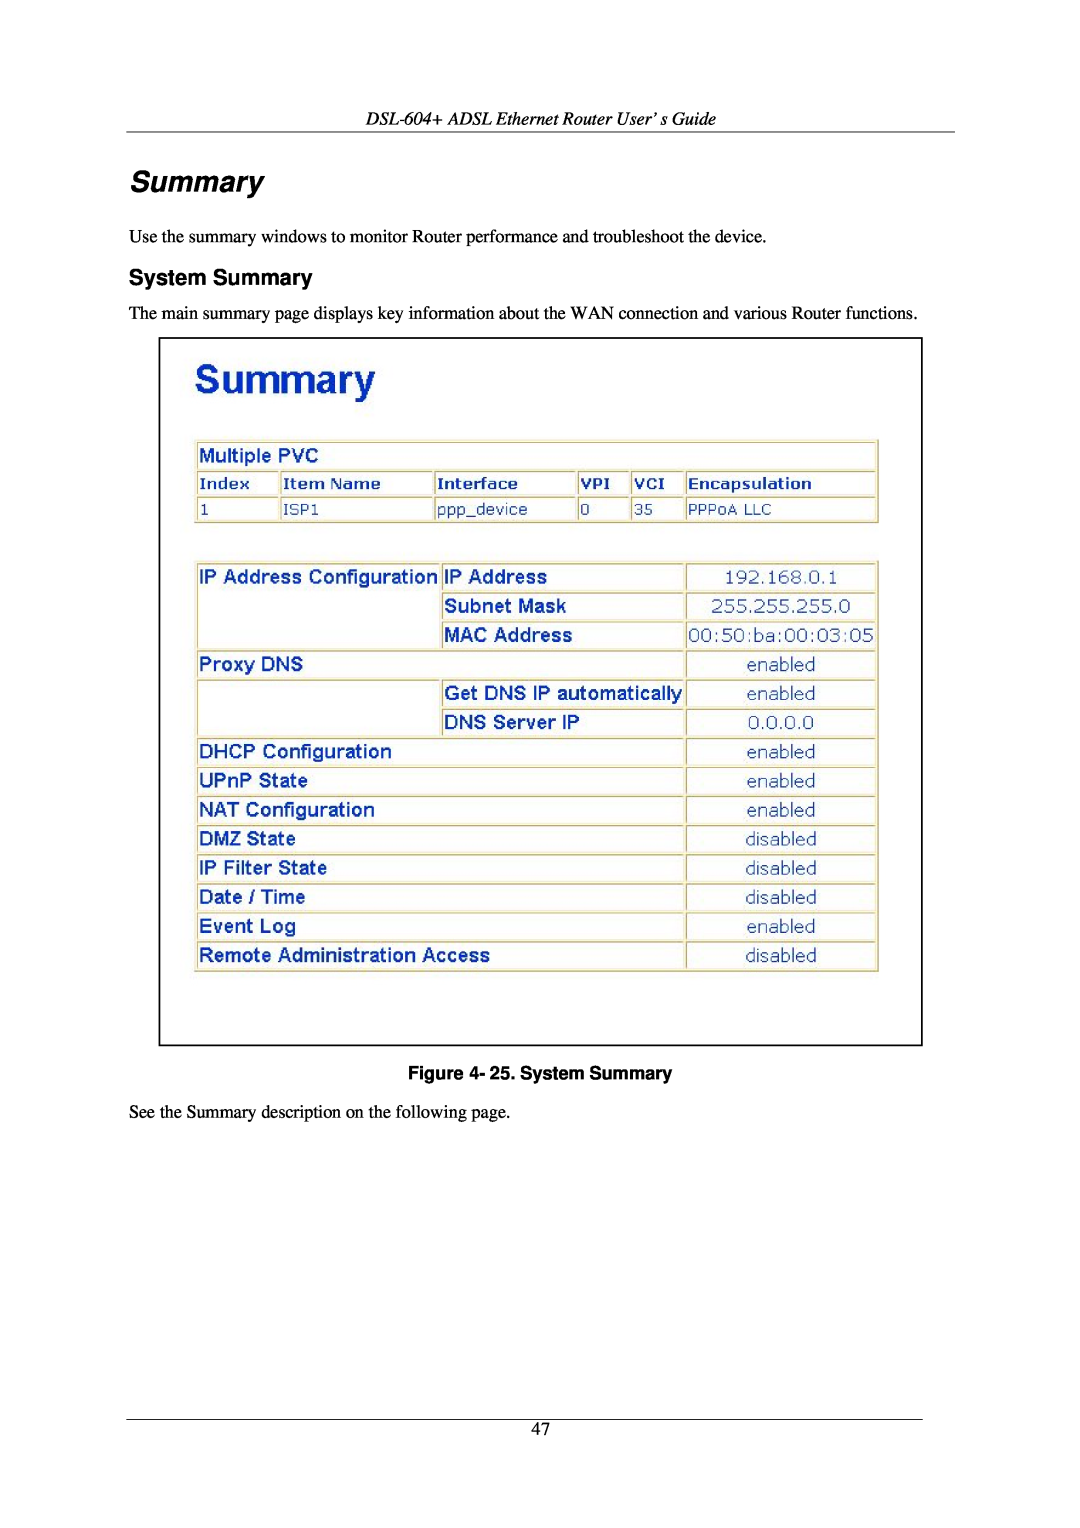 D-Link manual System Summary, DSL-604+ ADSL Ethernet Router User’s Guide 